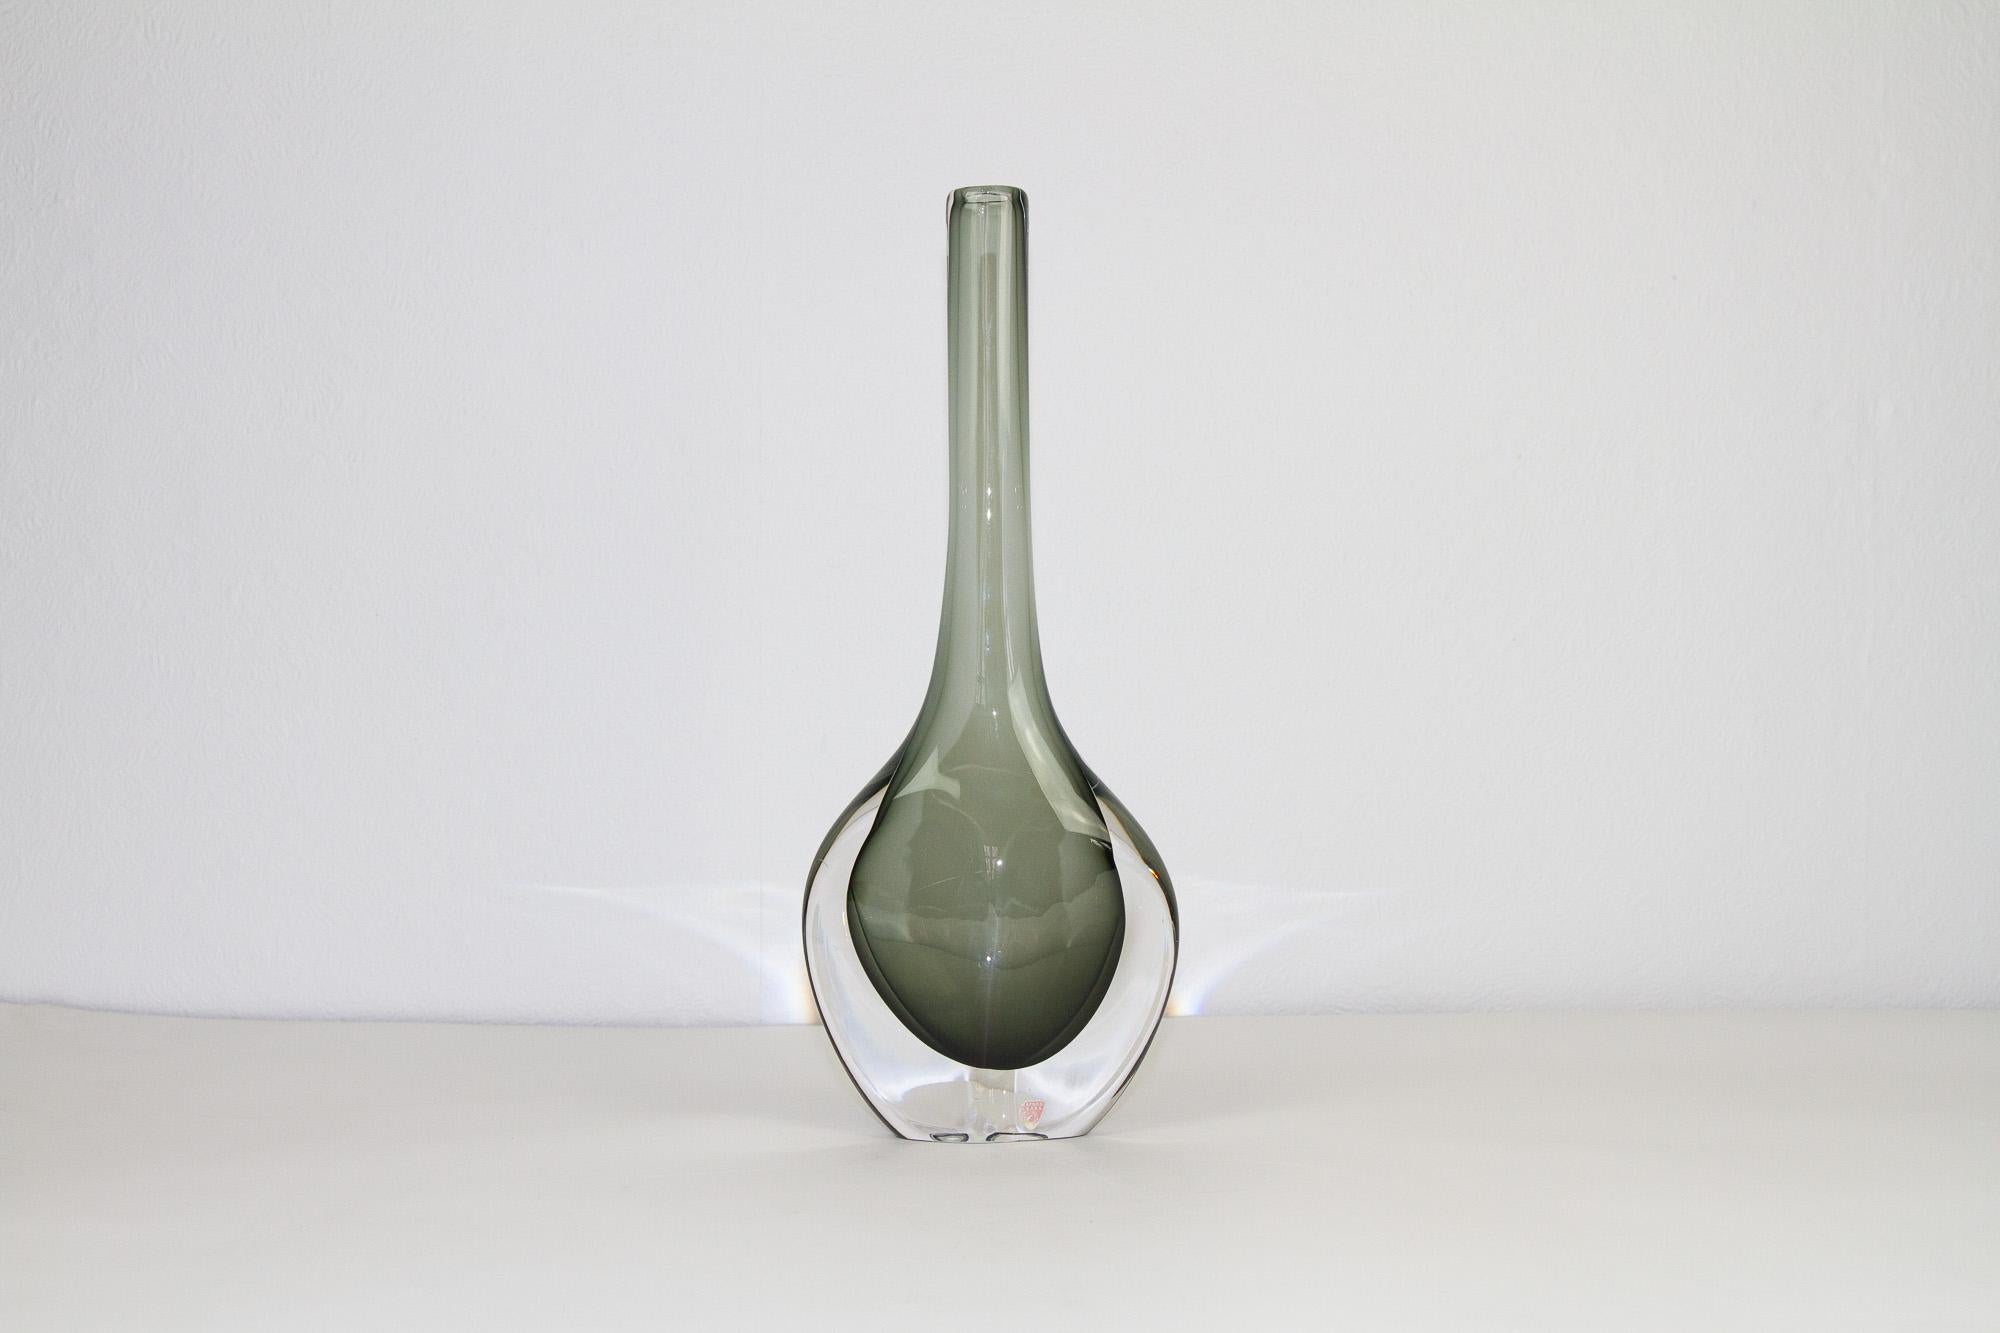 Scandinavian Modern glass vase by Nils Landberg for Orrefors, 1950s
Tall Swedish handmade Sommerso smoked glass vase. Tear drop design by Swedish designer Nils Landberg for Orrefors Glassworks in the 1950s.
Smoked glass core with clear outer